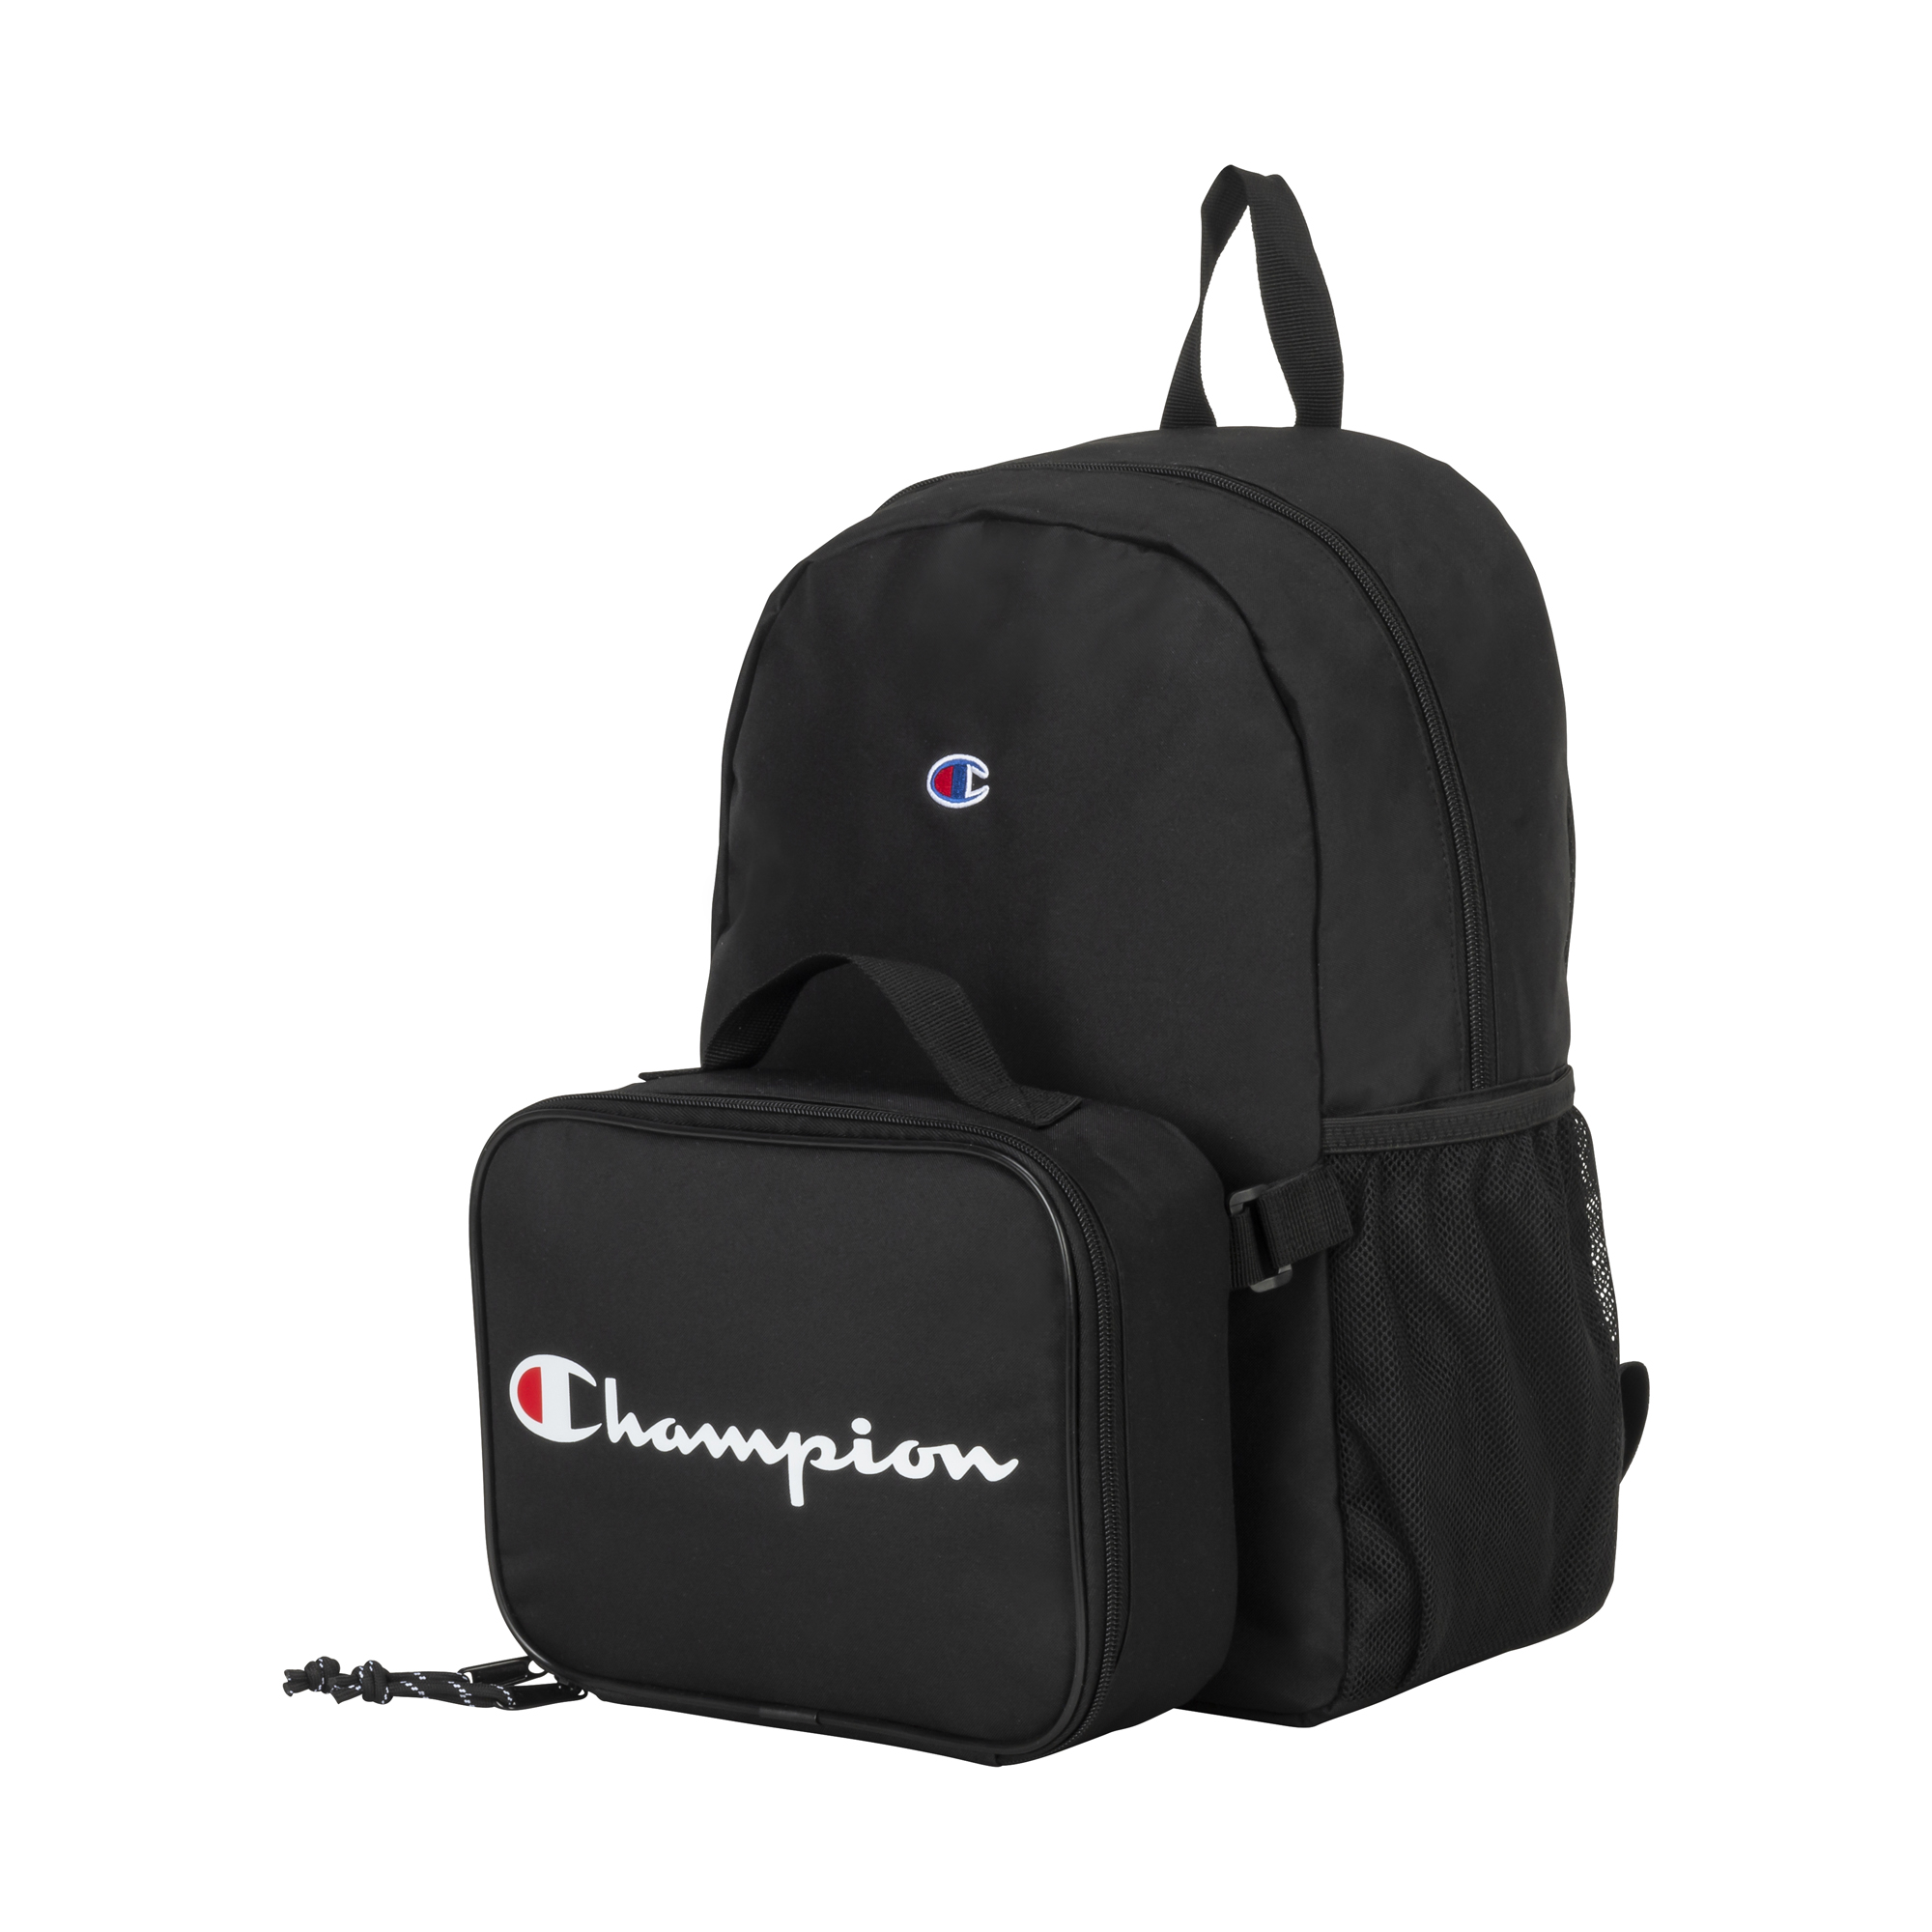 Champion Munch Backpack Lunch Kit Combo - image 1 of 3